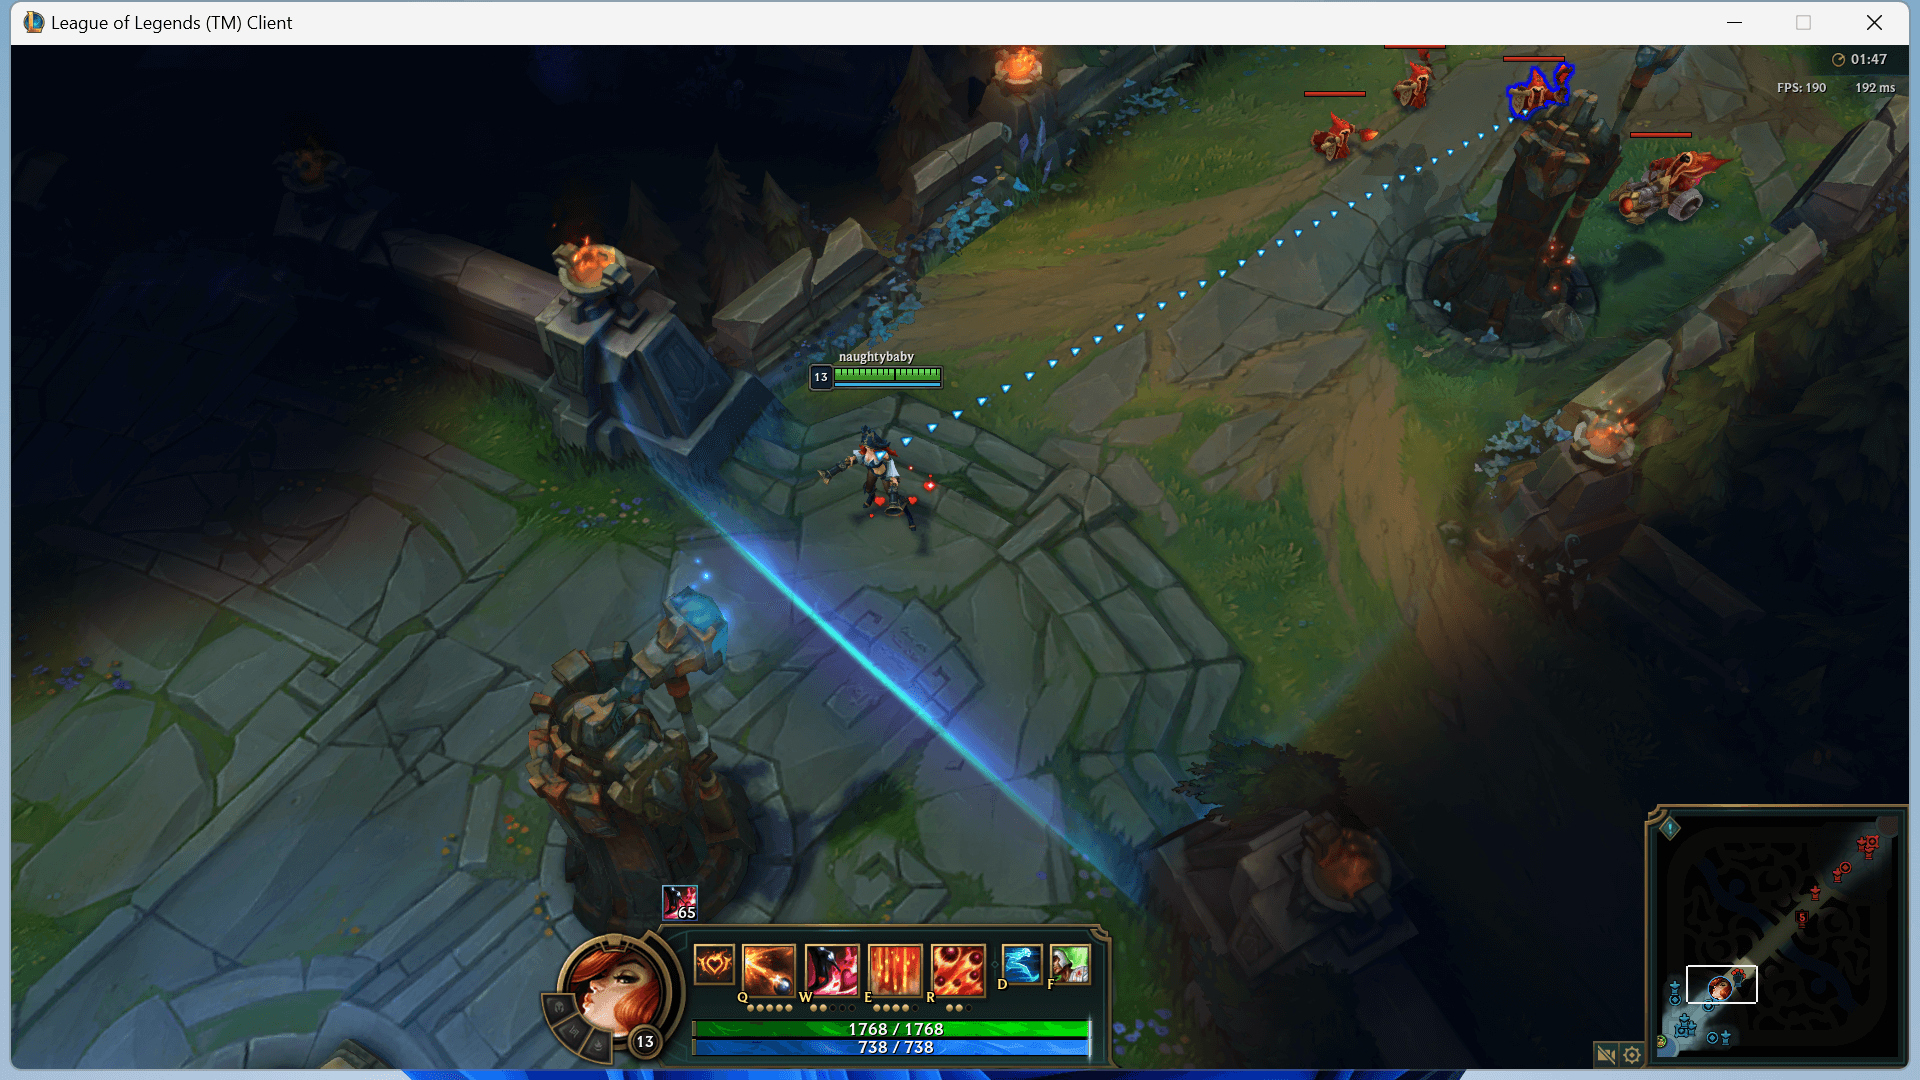 League of Legends game in windowed mode.